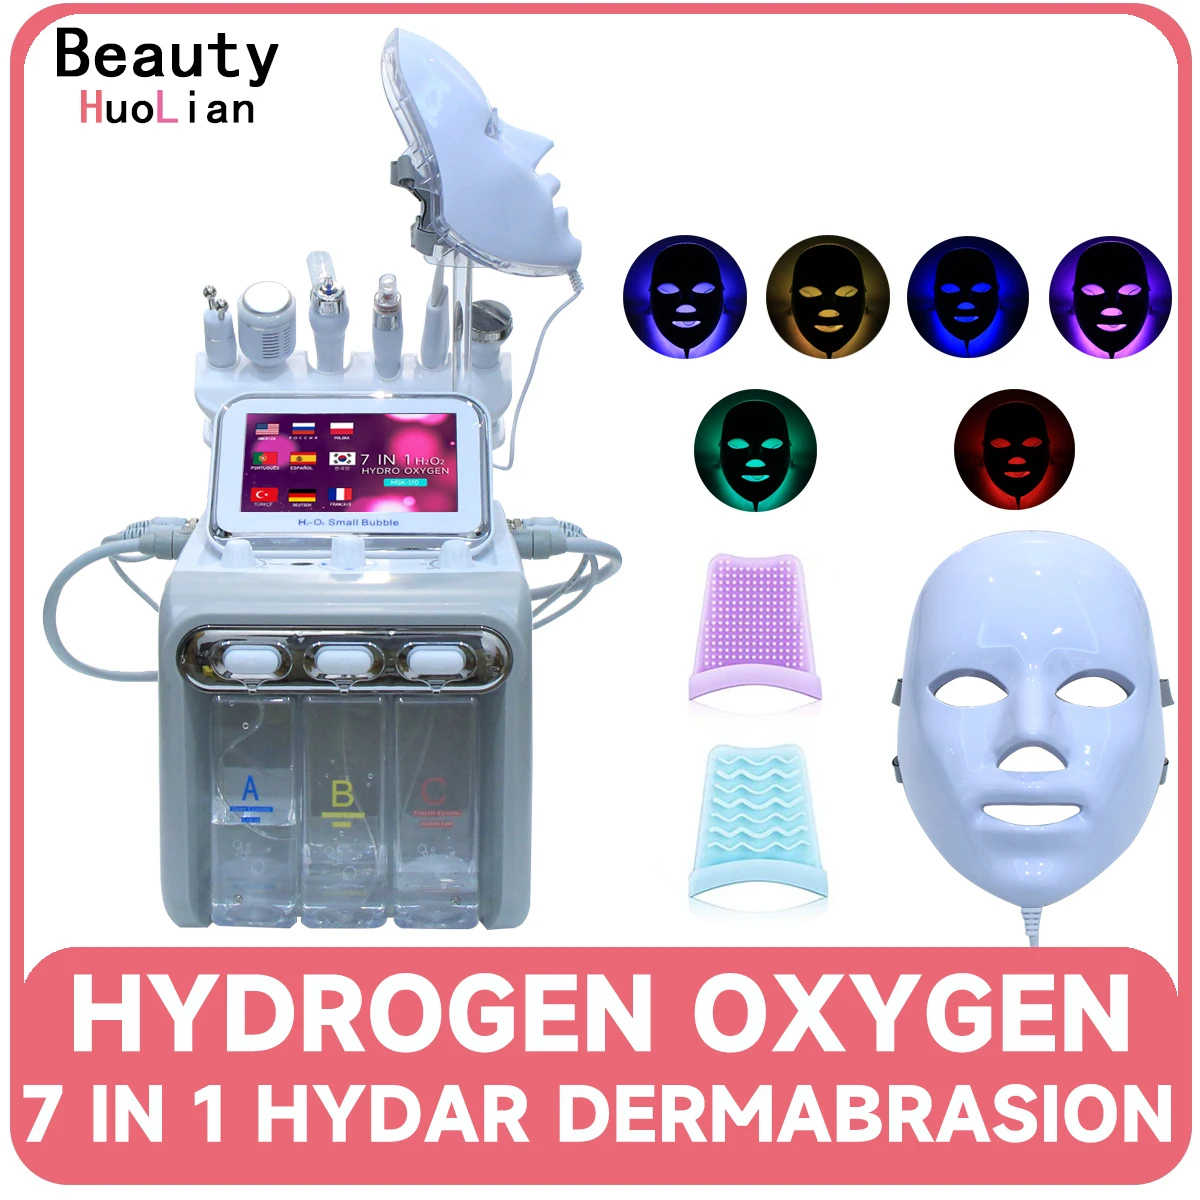 

New 7 in 1 Hydrogen Oxygen Small Bubble H2O2 Facial Beauty Machine Jet Peel Hydro Dermabrasion Pore Shrink Face Skin Cleansing